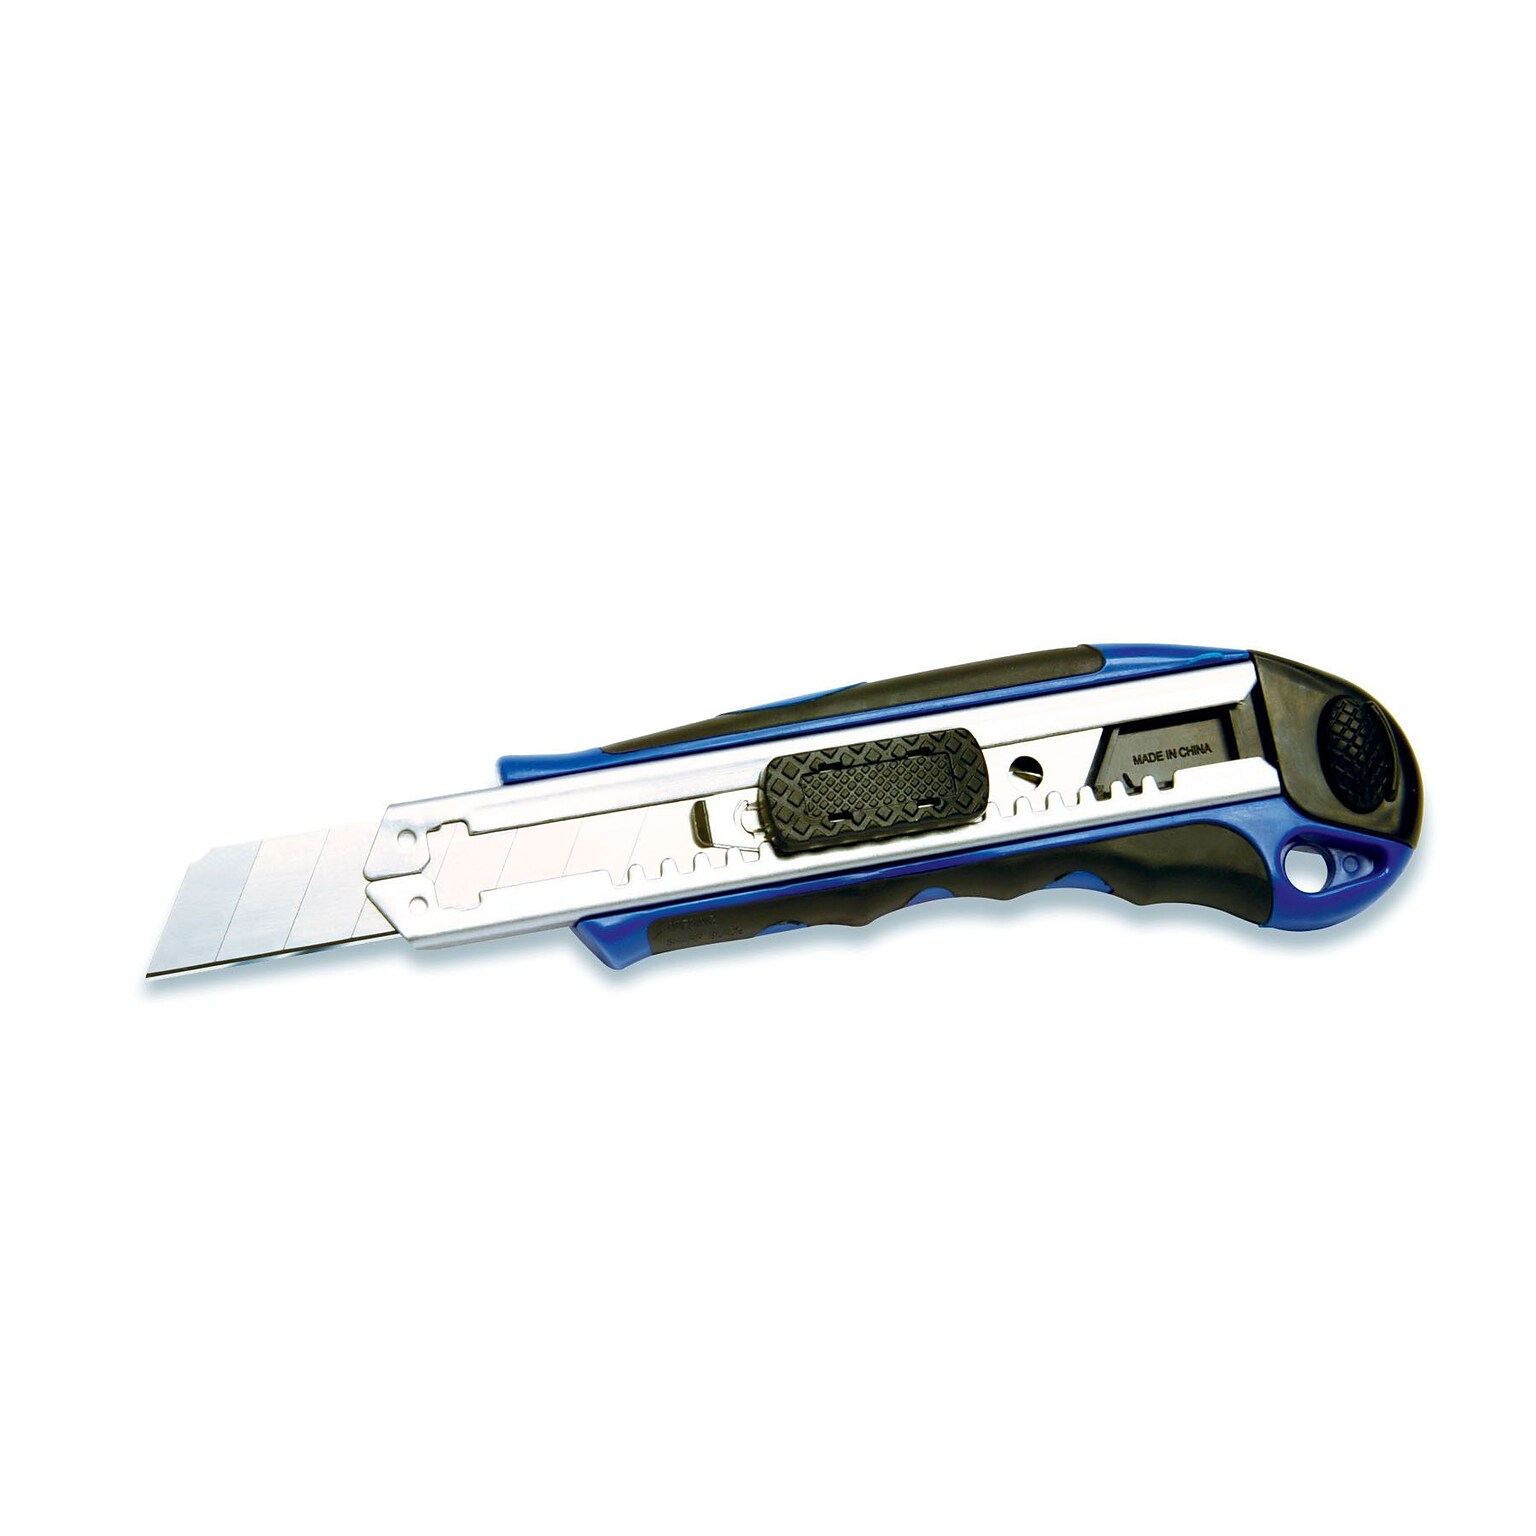 Cosco Plastic/Rubber Heavy Duty 8-Point Retractable Snap-Off Utility Knife, Blue, 4/Pack (091514PK4)